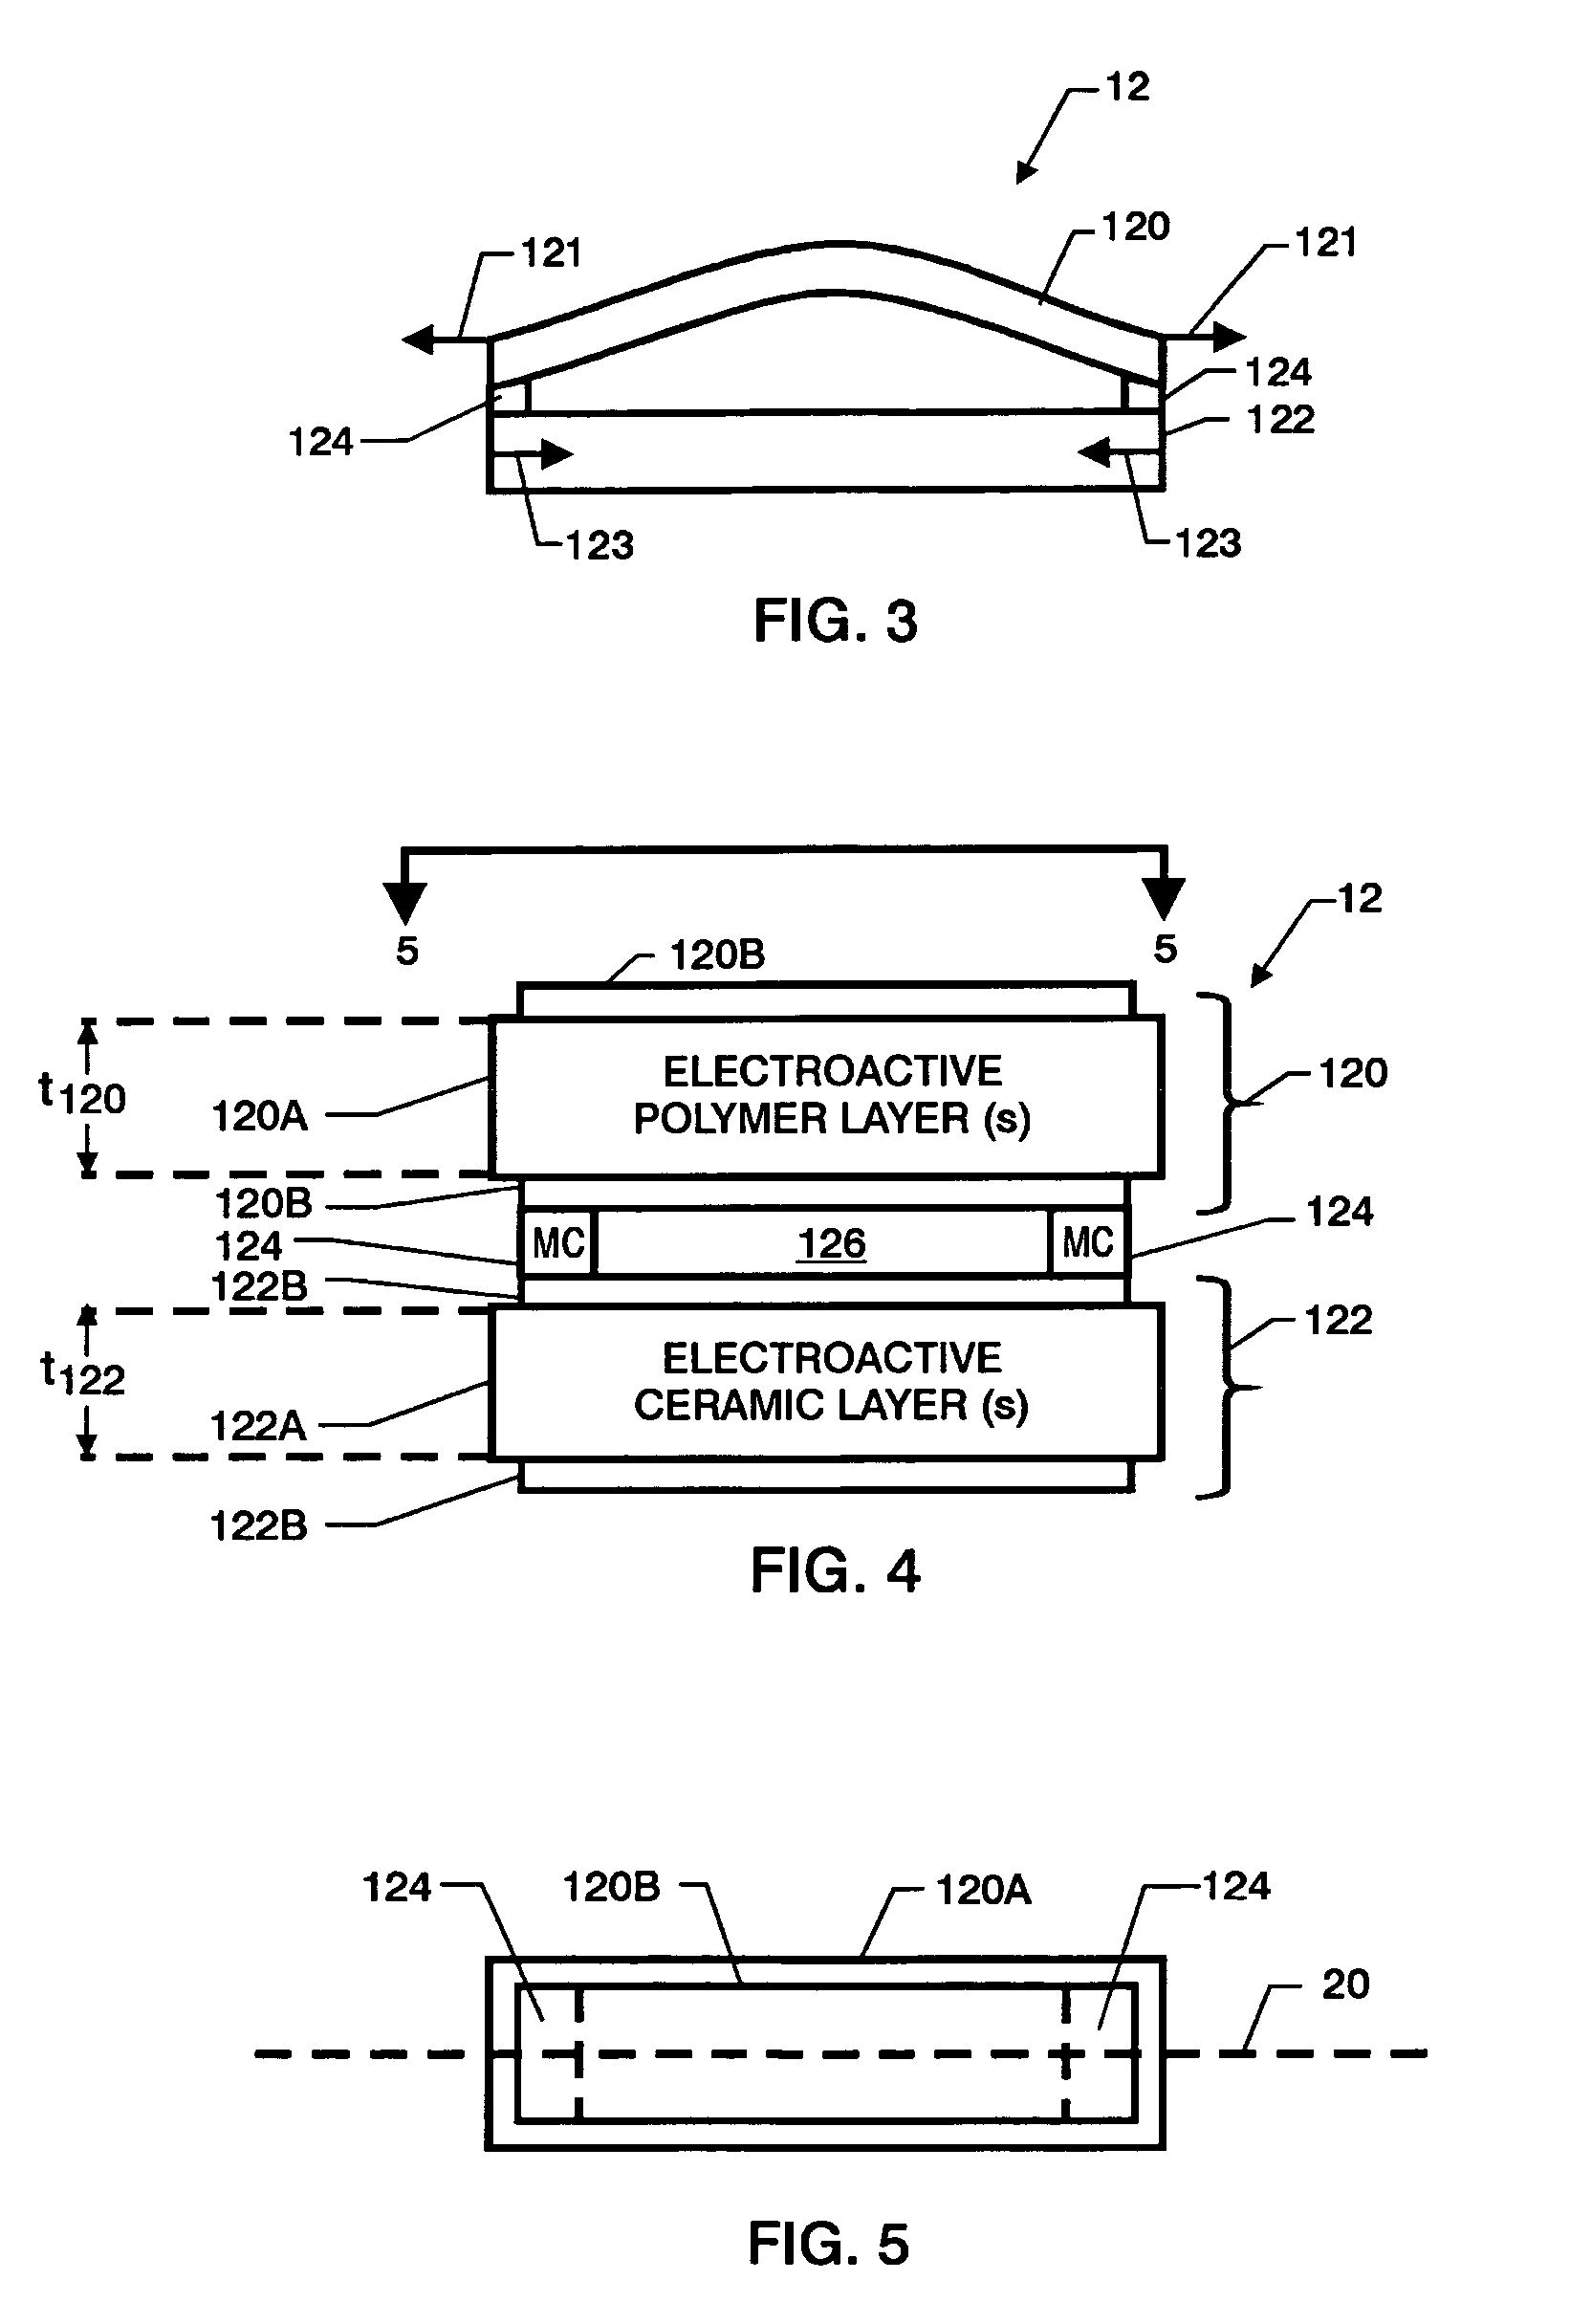 Hybrid eletromechanical actuator and actuation system